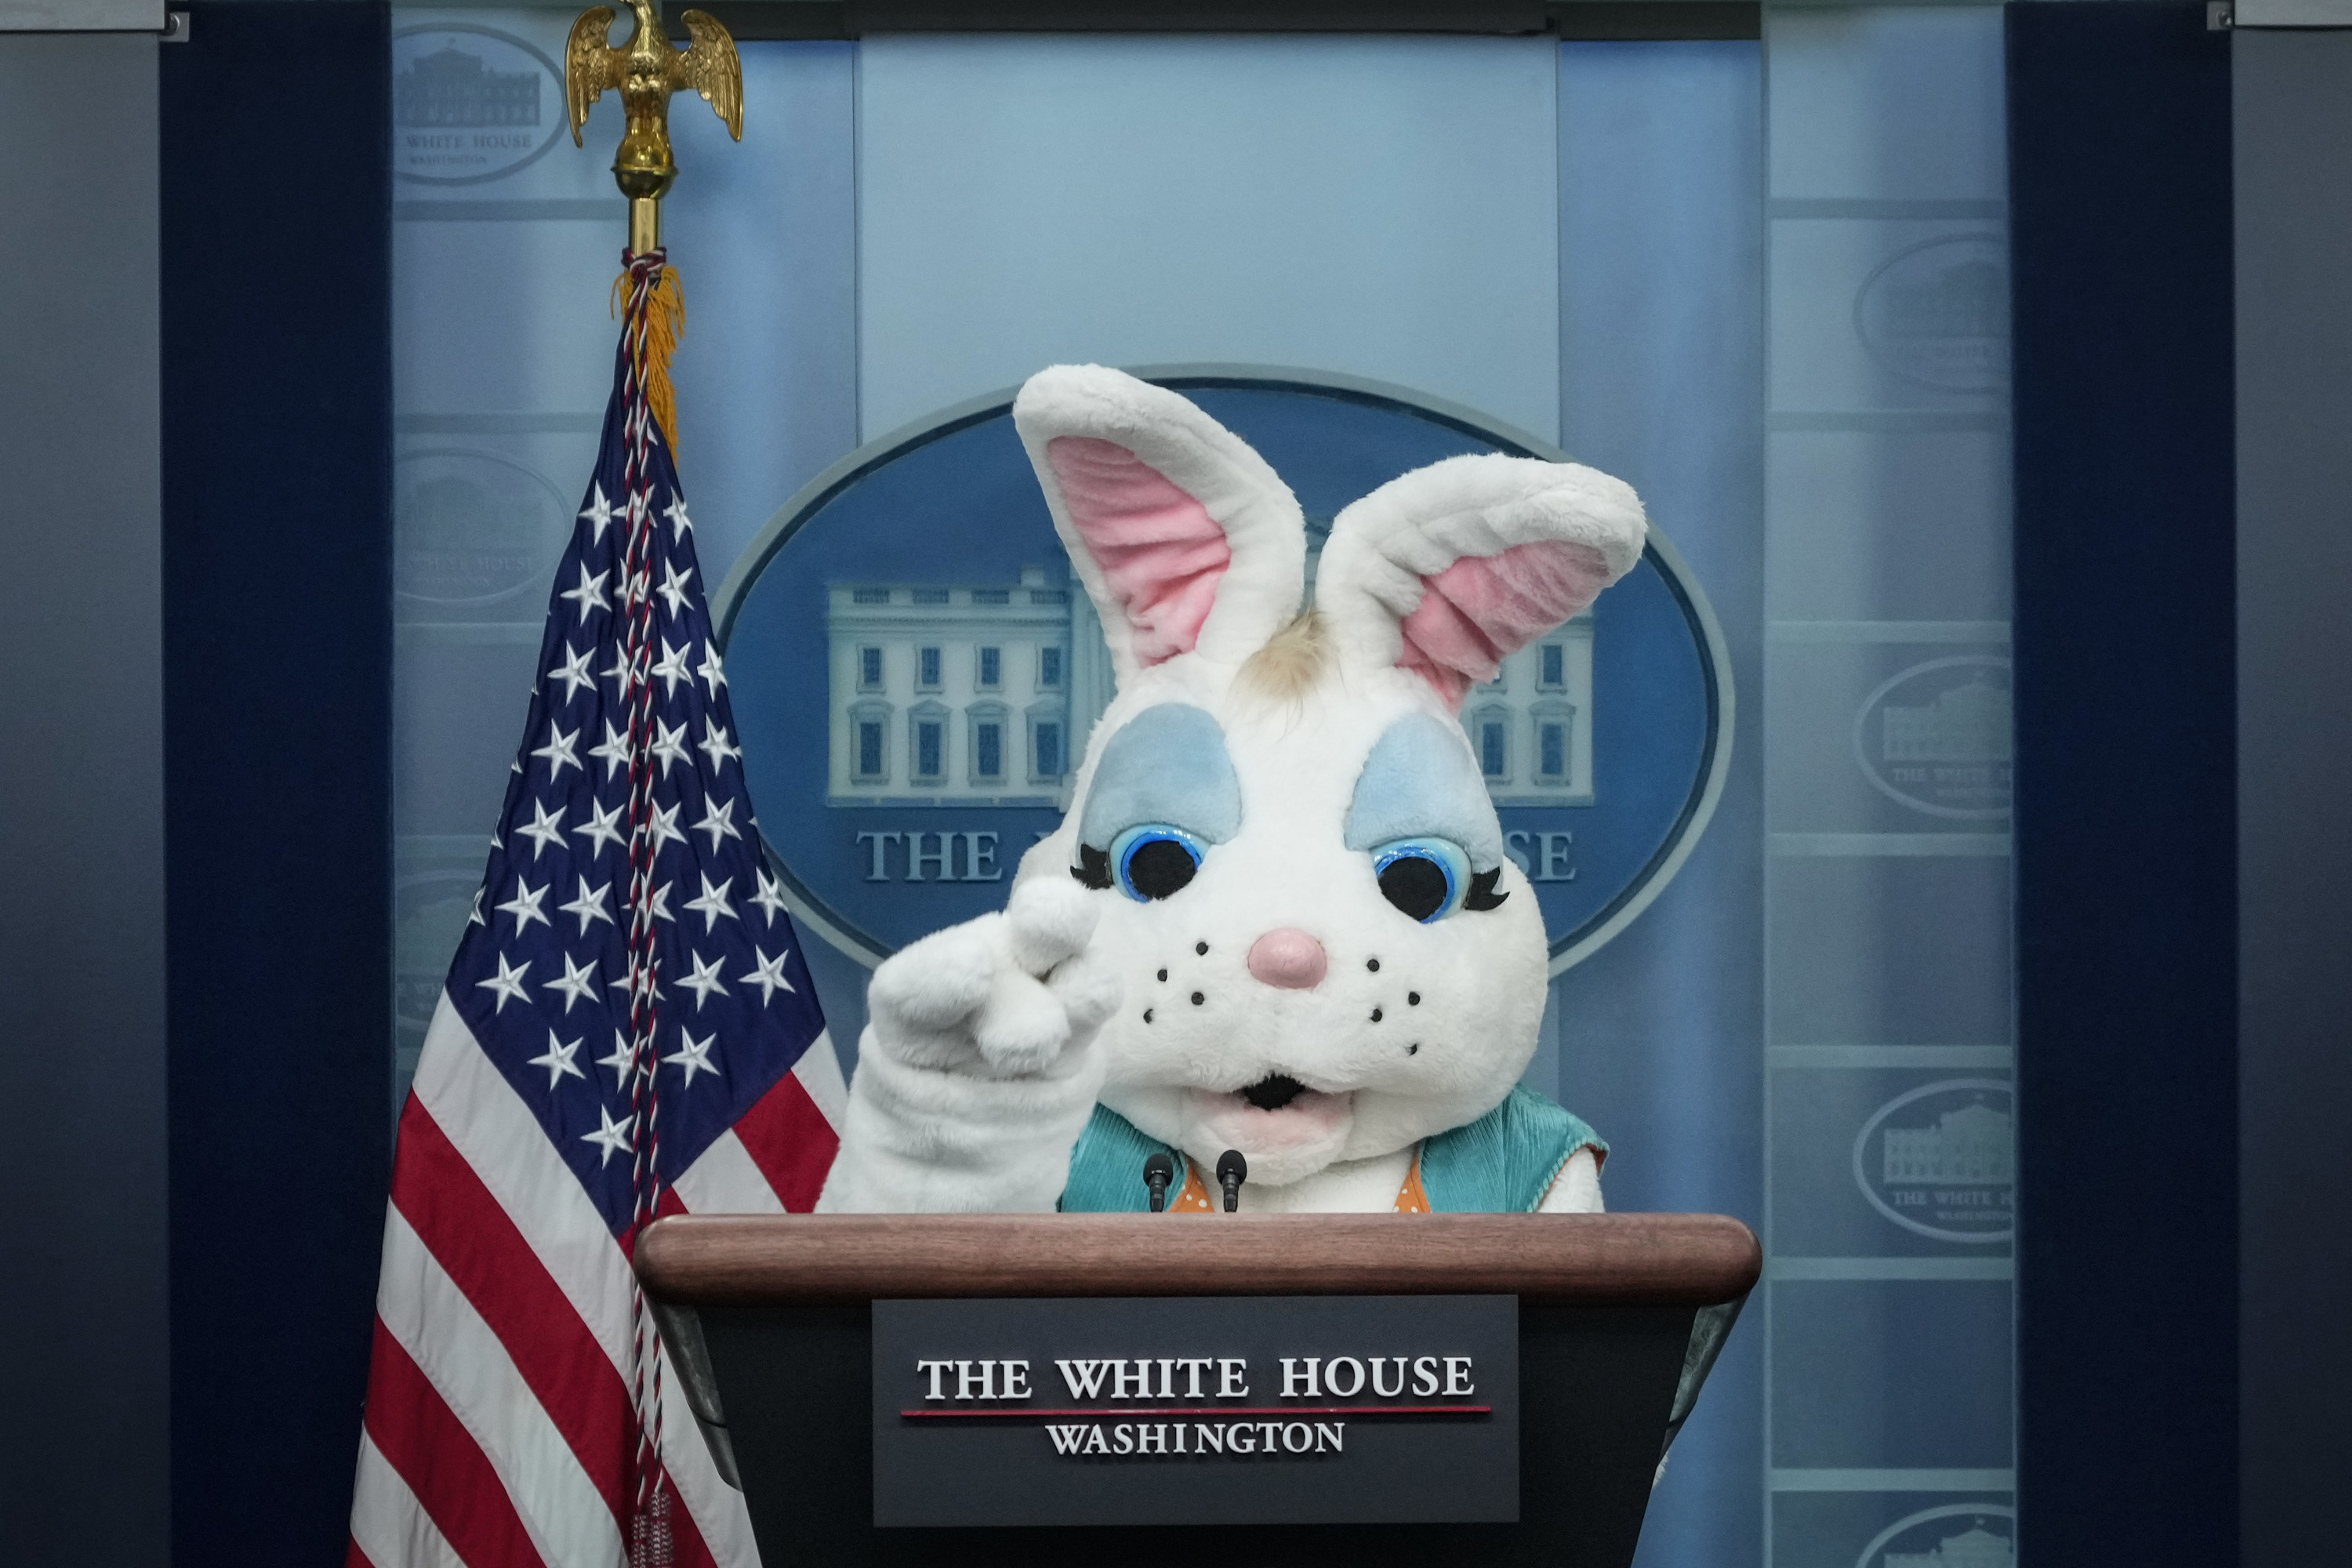 The ABBA Bunny stands behind the podium in the press room